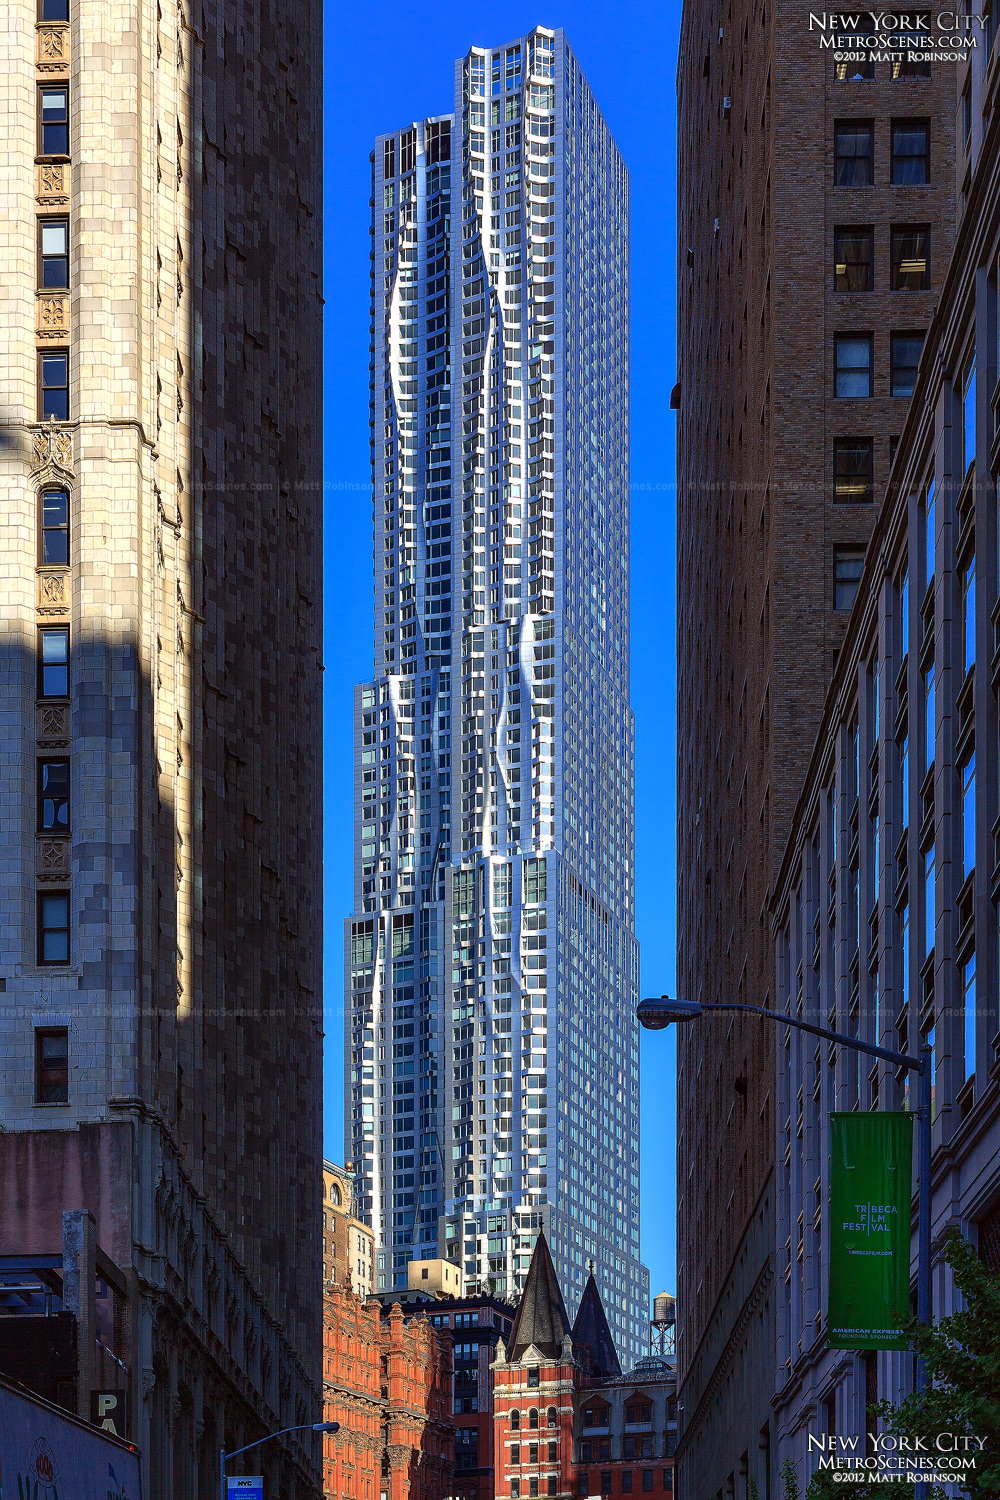 New York by Gehry (Beekman Tower) as seen from Barclay Street